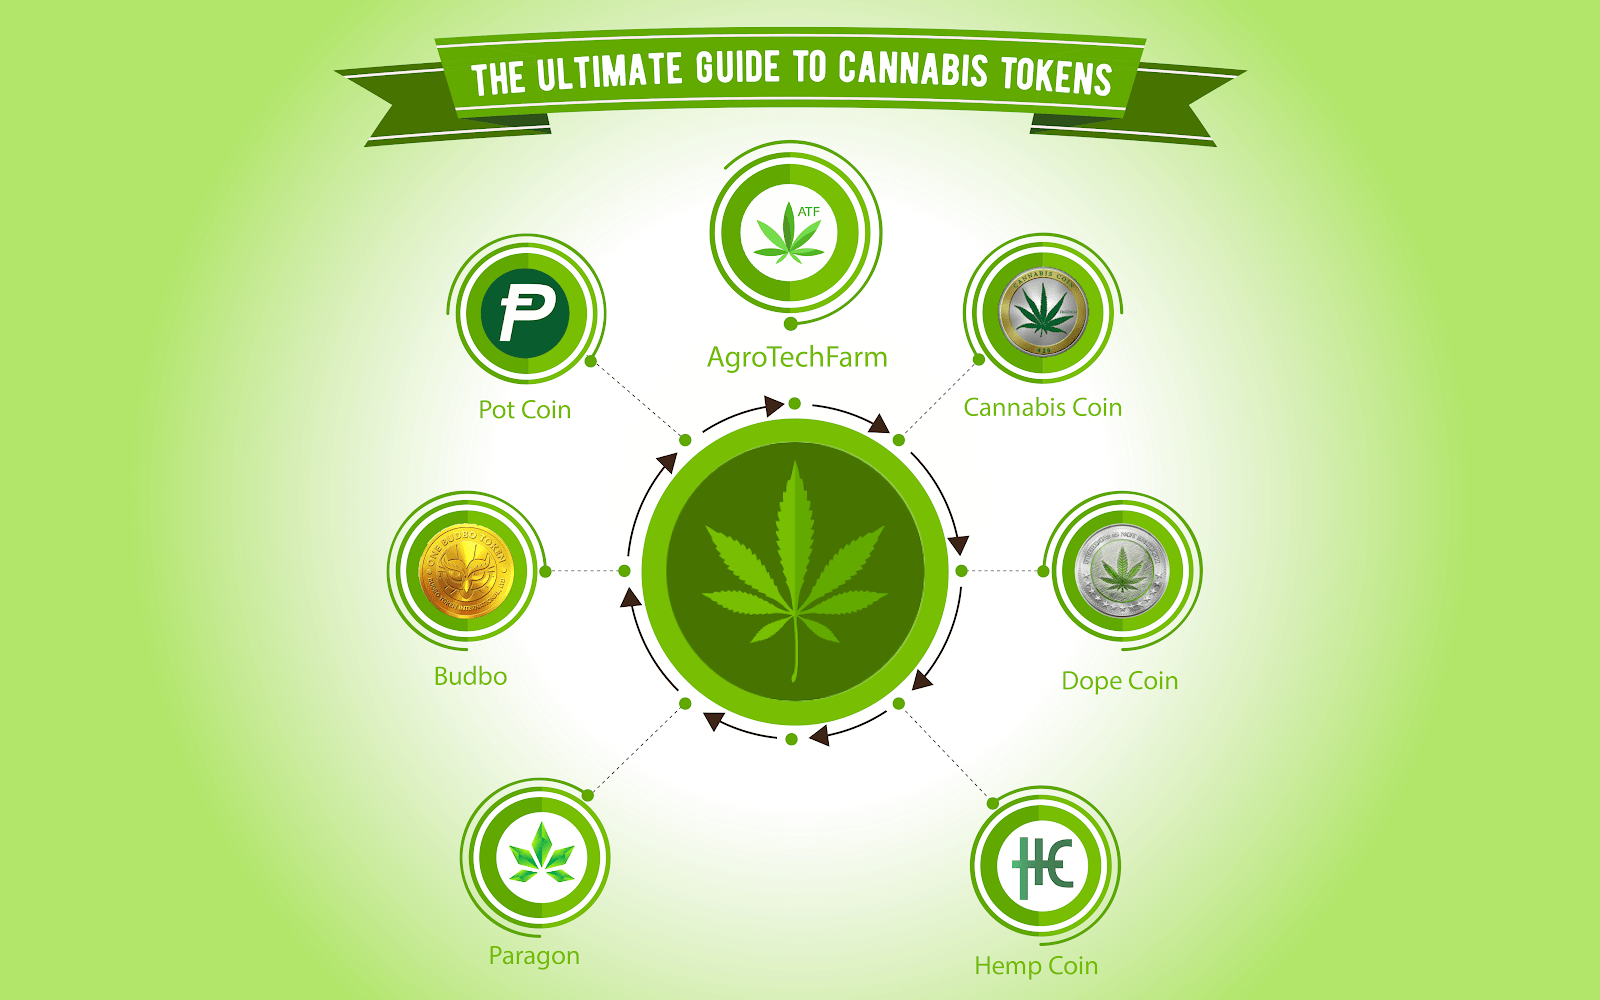 The Ultimate Guide To Cannabis Tokens